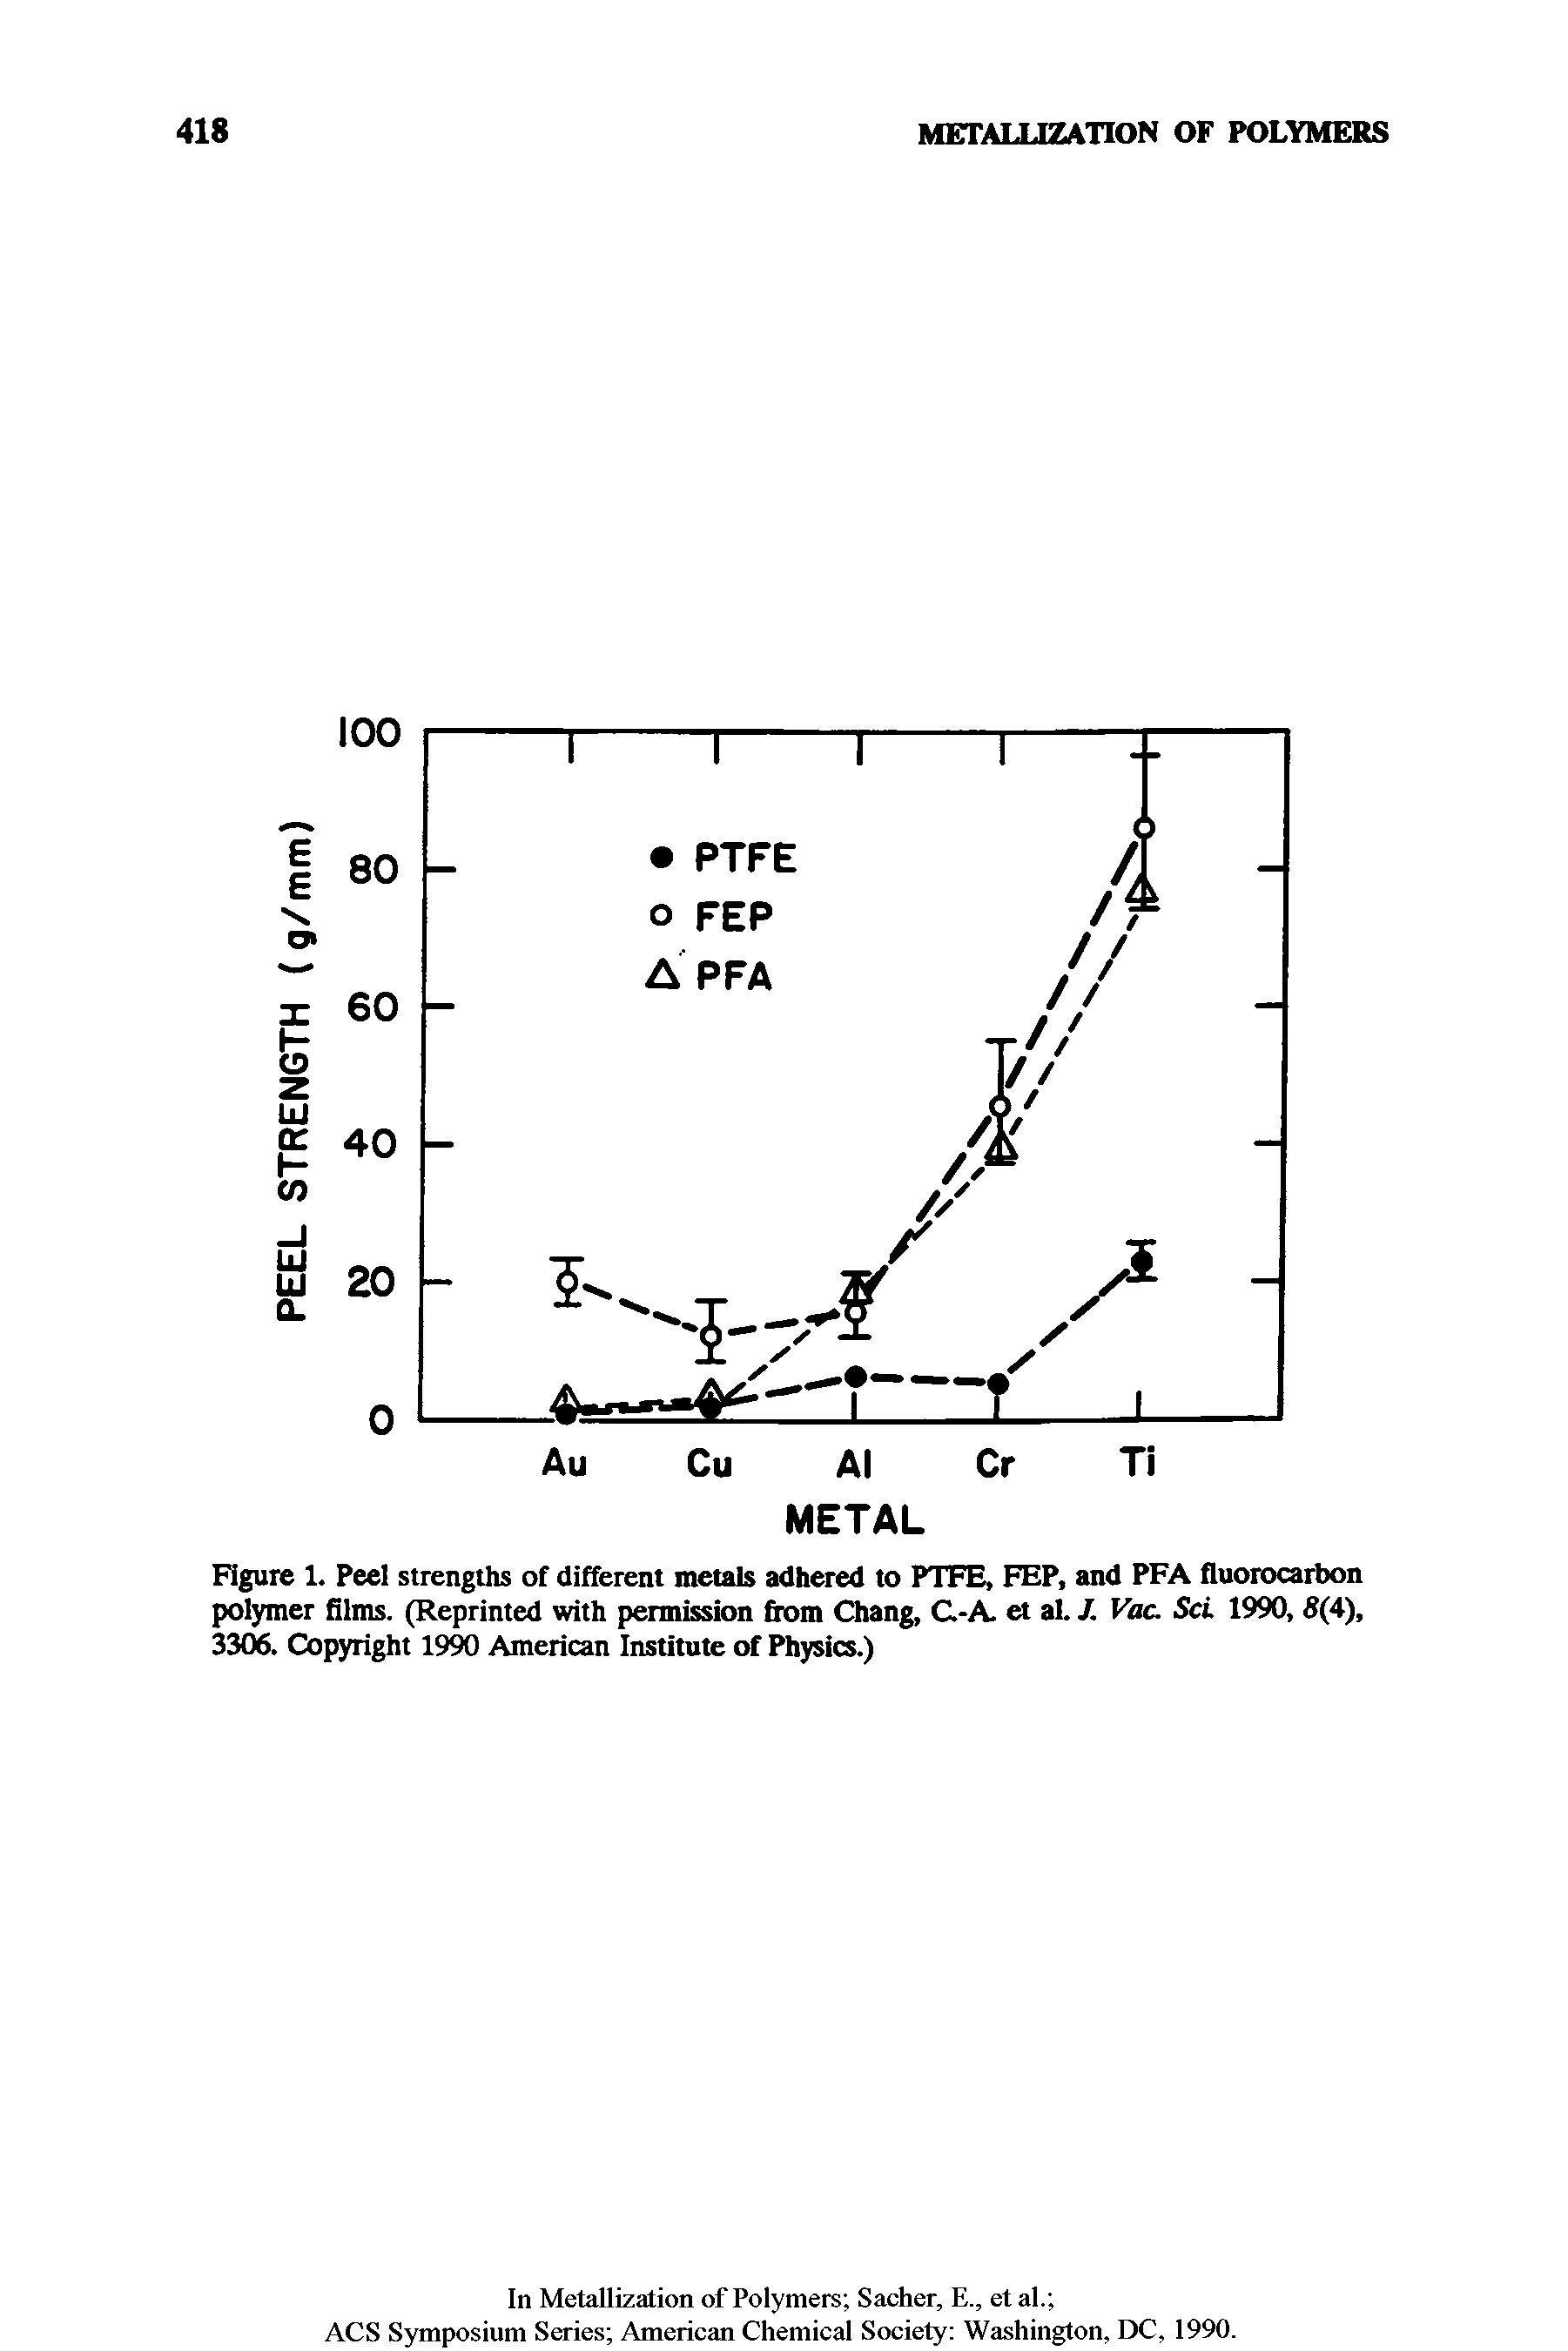 Figure 1. Peel strengths of different metals adhered to PTFE, FEP, and PFA fluorocarbon polymer films. (Reprinted with permission from Chang, C.-A. et al. J. Vac. ScL 1990, 8(4), 3306. Copyright 1990 American Institute of Physics.)...